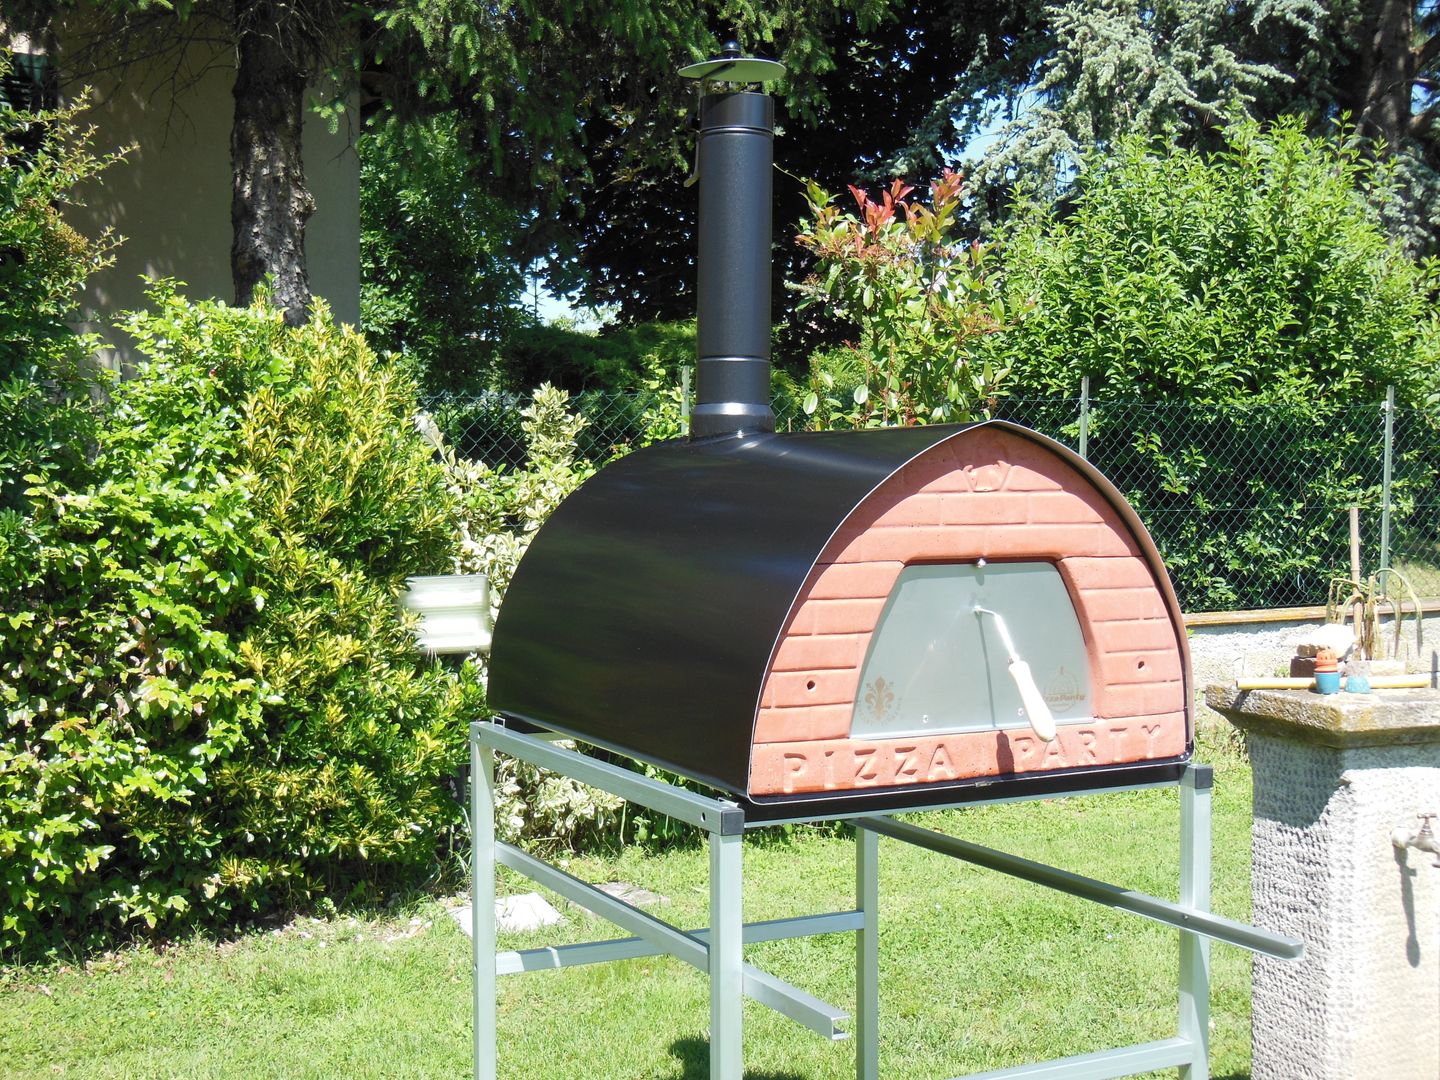 Wood fired pizza oven Pizzone by Pizza Party Genotema SRL Unipersonale حديقة Fire pits & barbecues